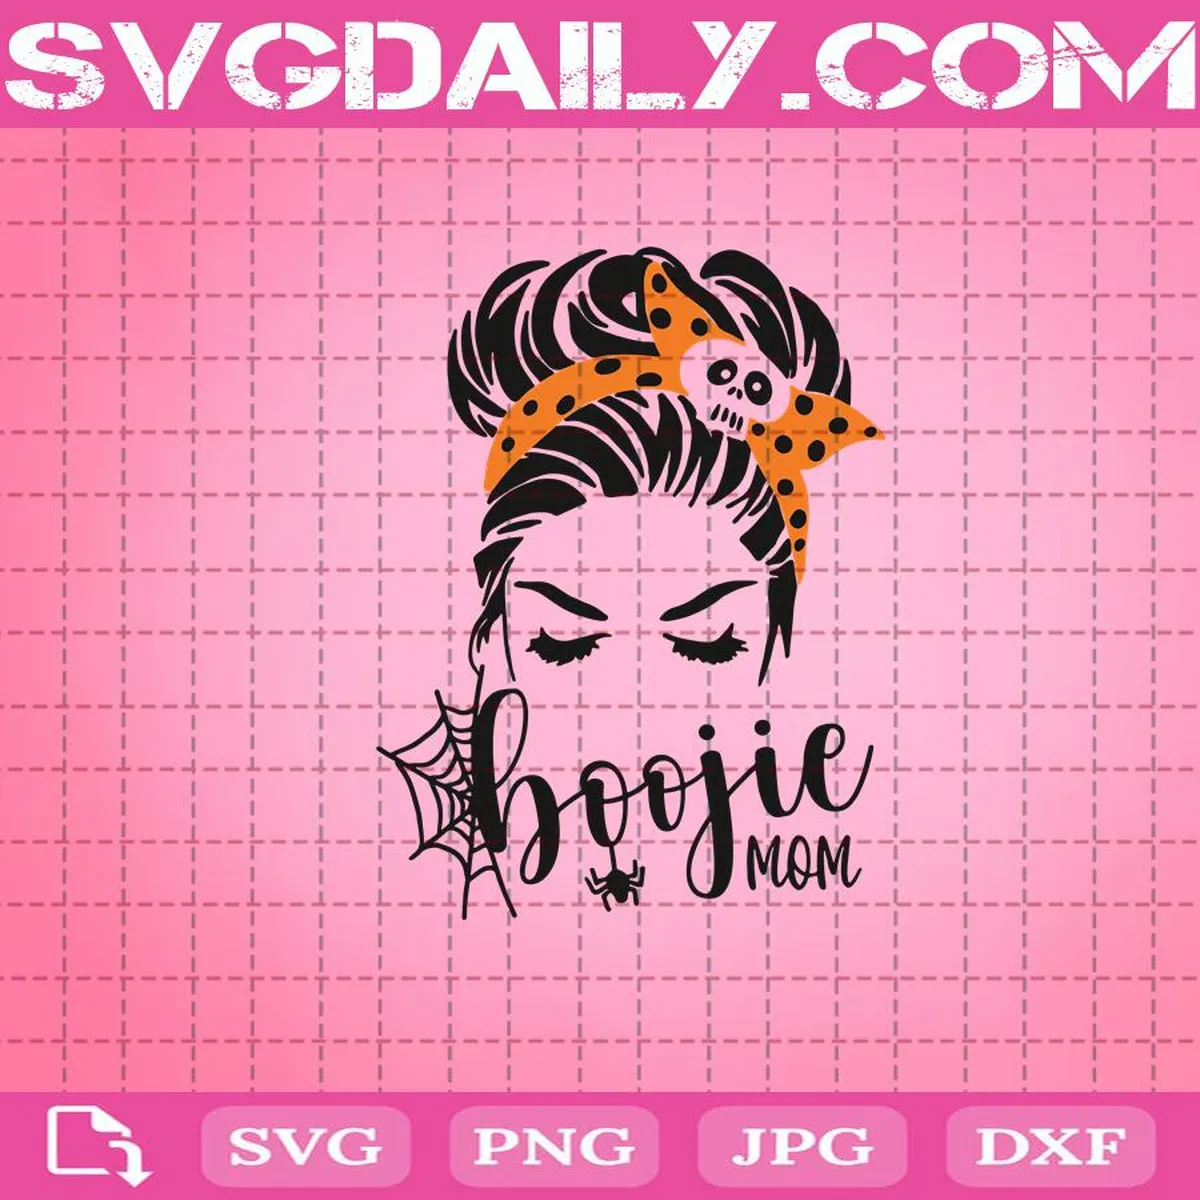 Boojie Mom Svg, Halloween Mom Svg, Boujie Svg, Boo In Boujie Svg, Svg Png Dxf Eps AI Instant Download